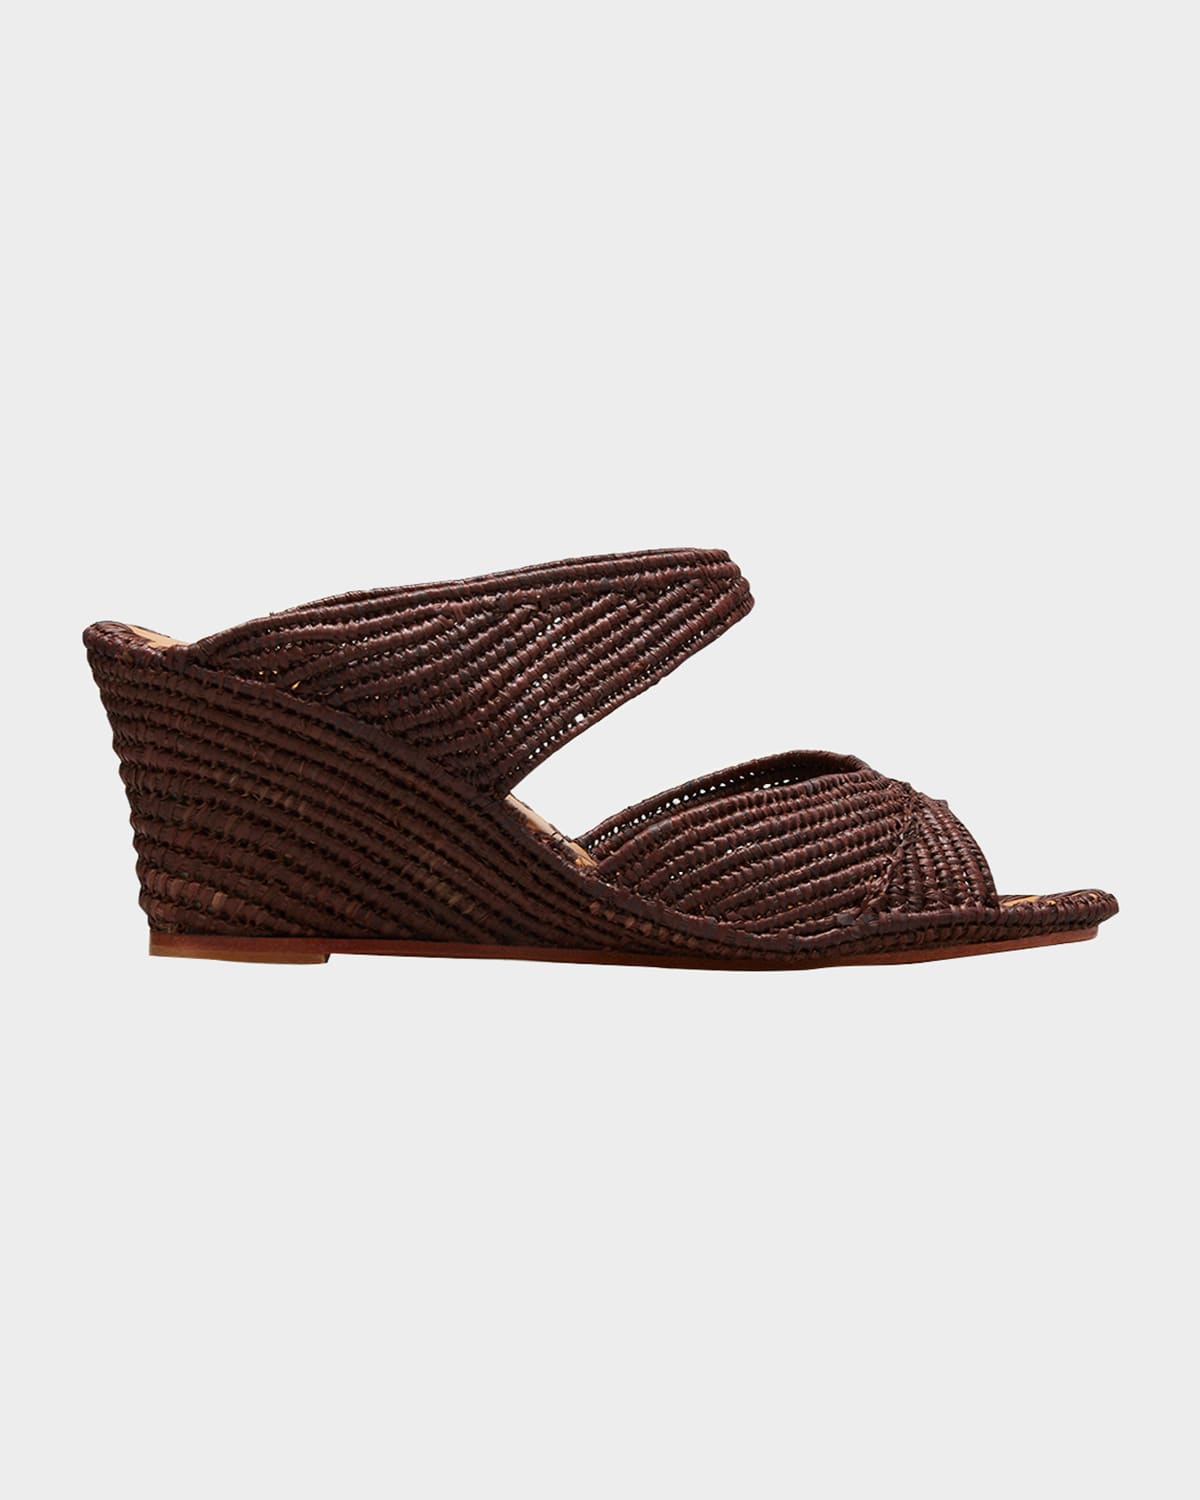 Carrie Forbes Houcine Raffia Wedge Sandals In Cafe